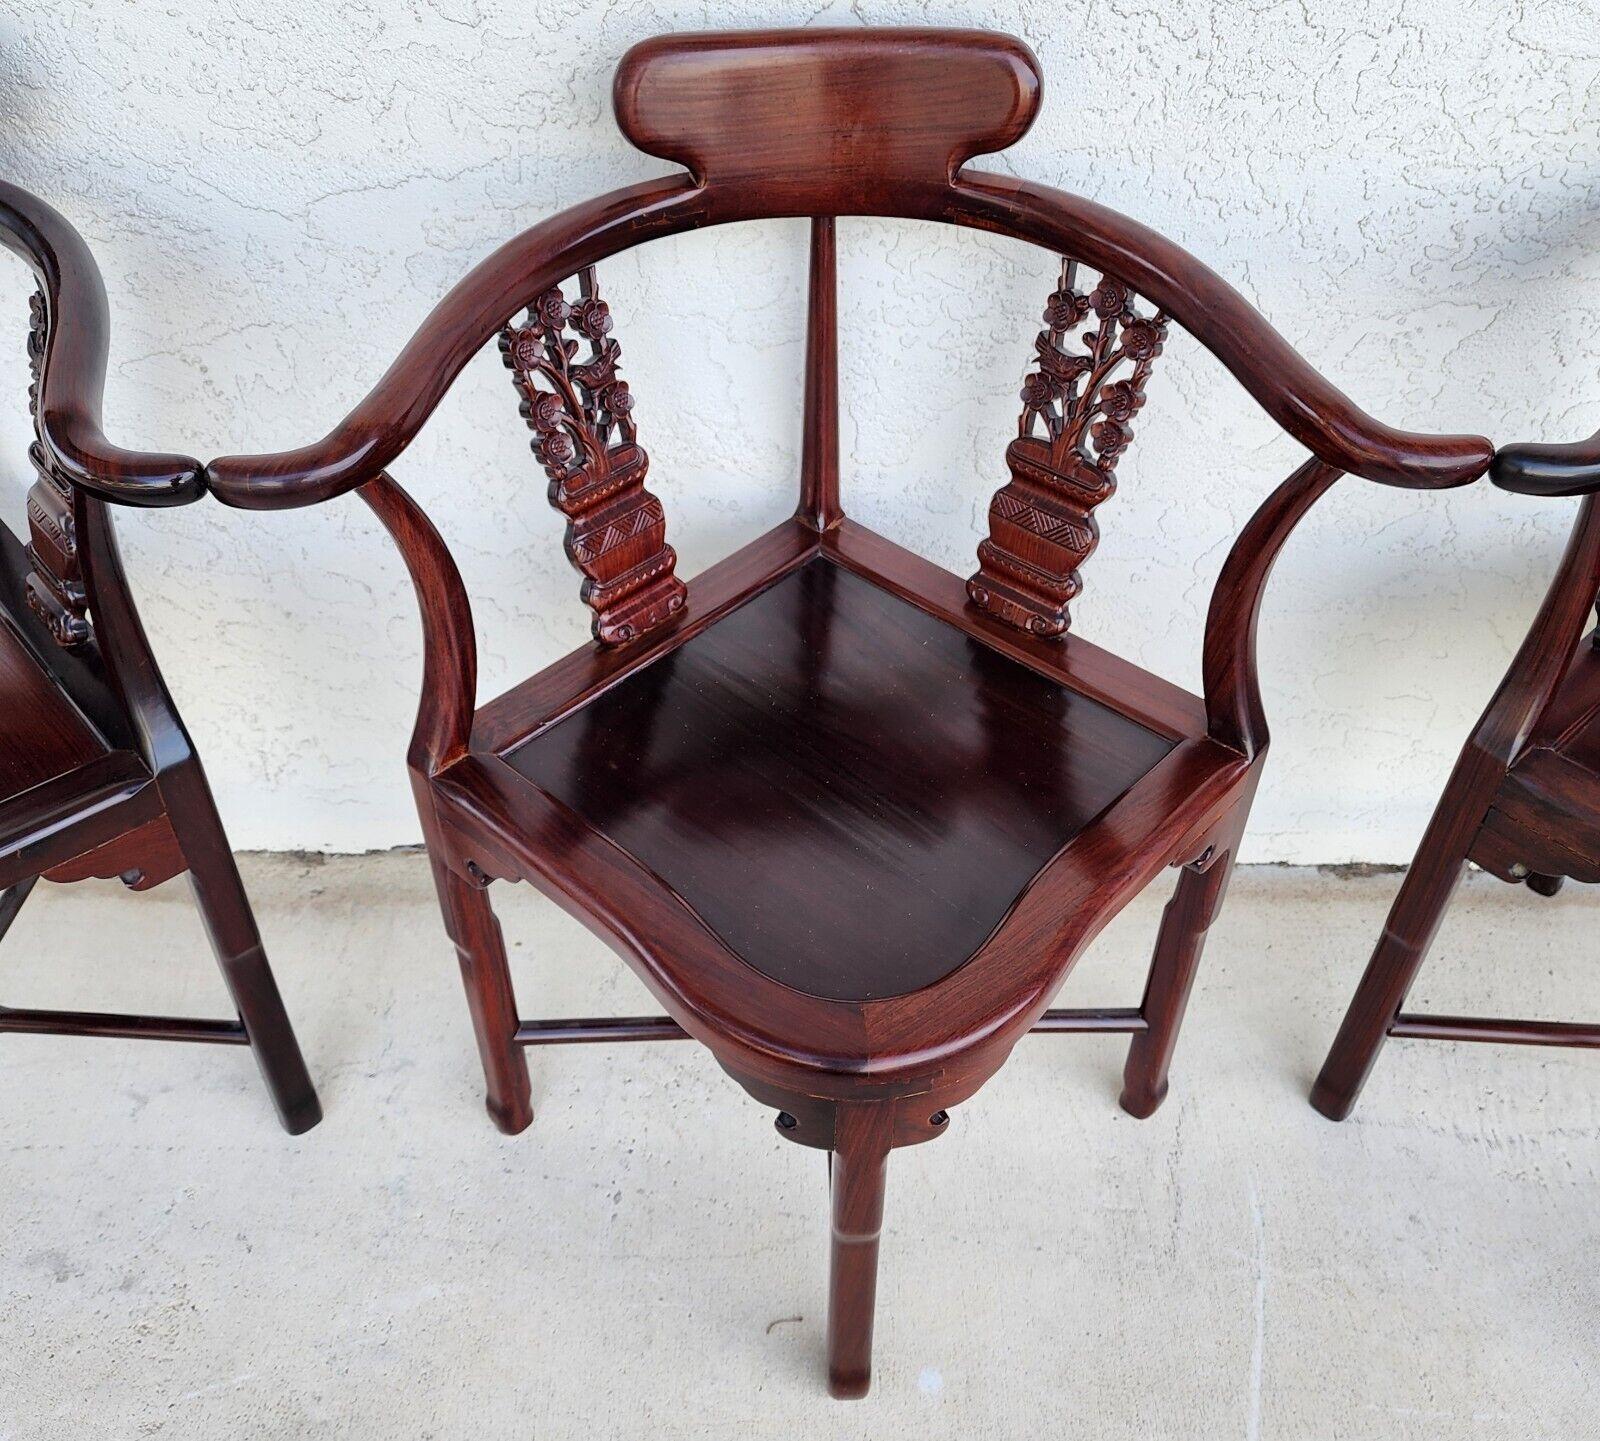 Chinese Rosewood Corner Dining Chairs Vintage - Set of 4 For Sale 4